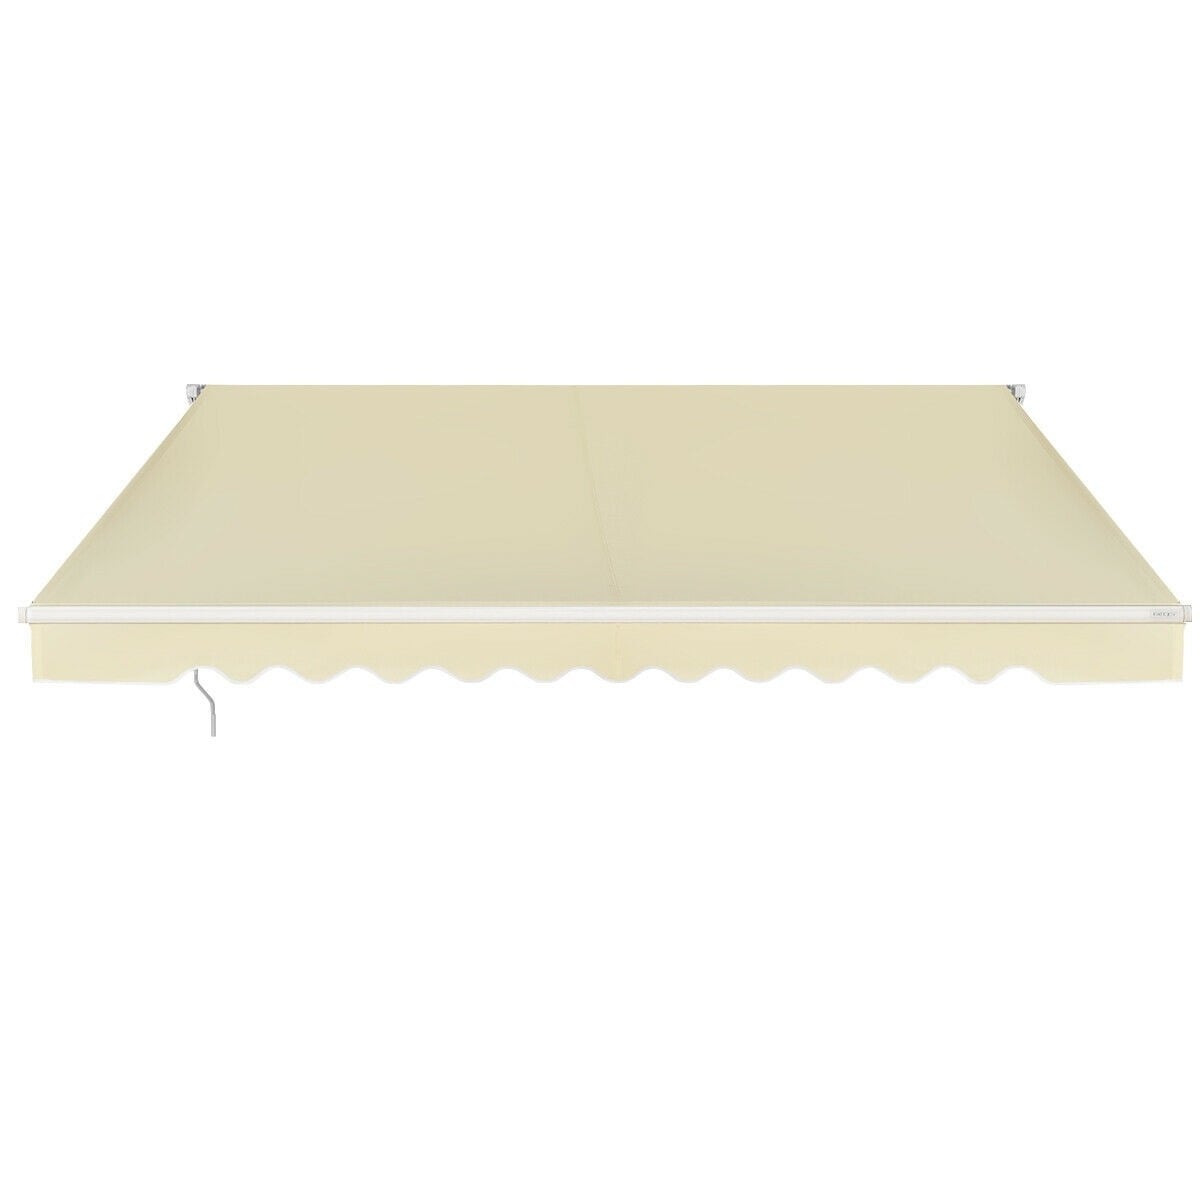 Outdoor Manual Retractable Awning Cover Shelter Patio Sun Shade-Beige